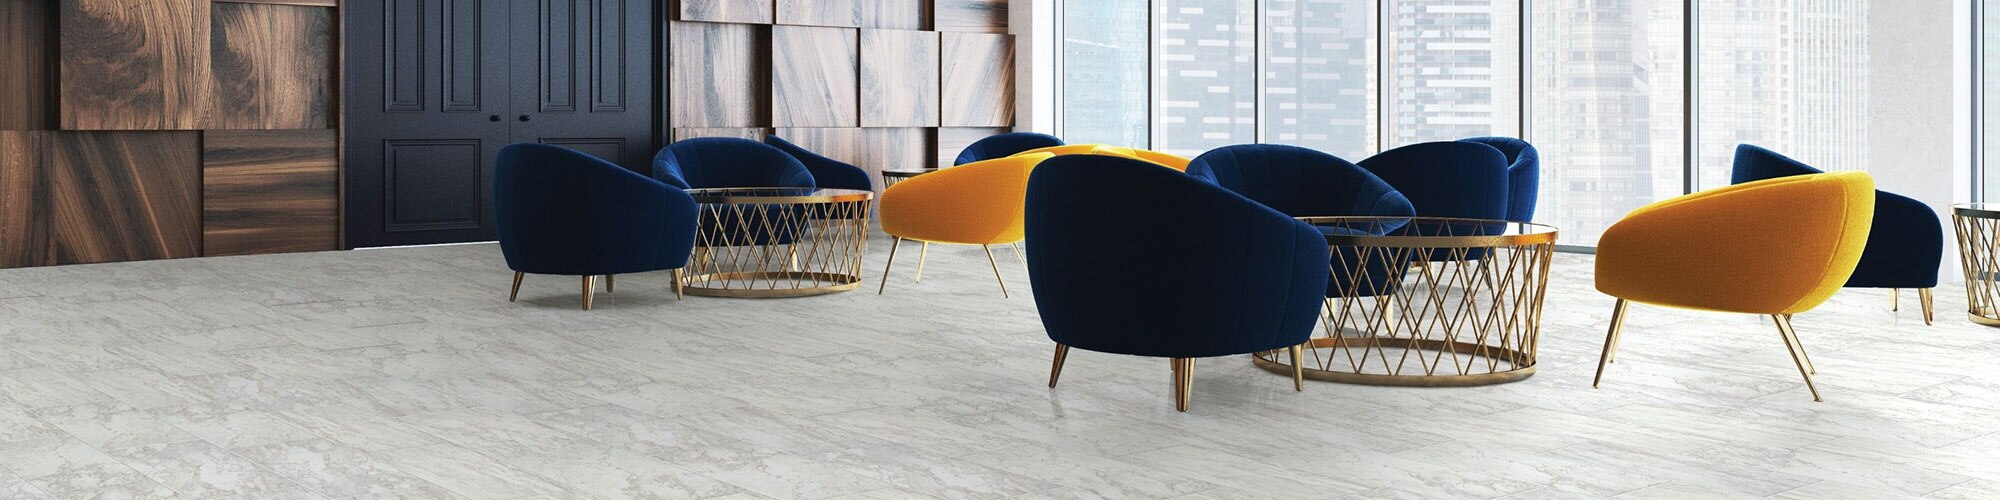 Highrise lounge area with white & gray floor tile that looks like marble, navy and yellow velvet chairs, and windows with view of city skyline.